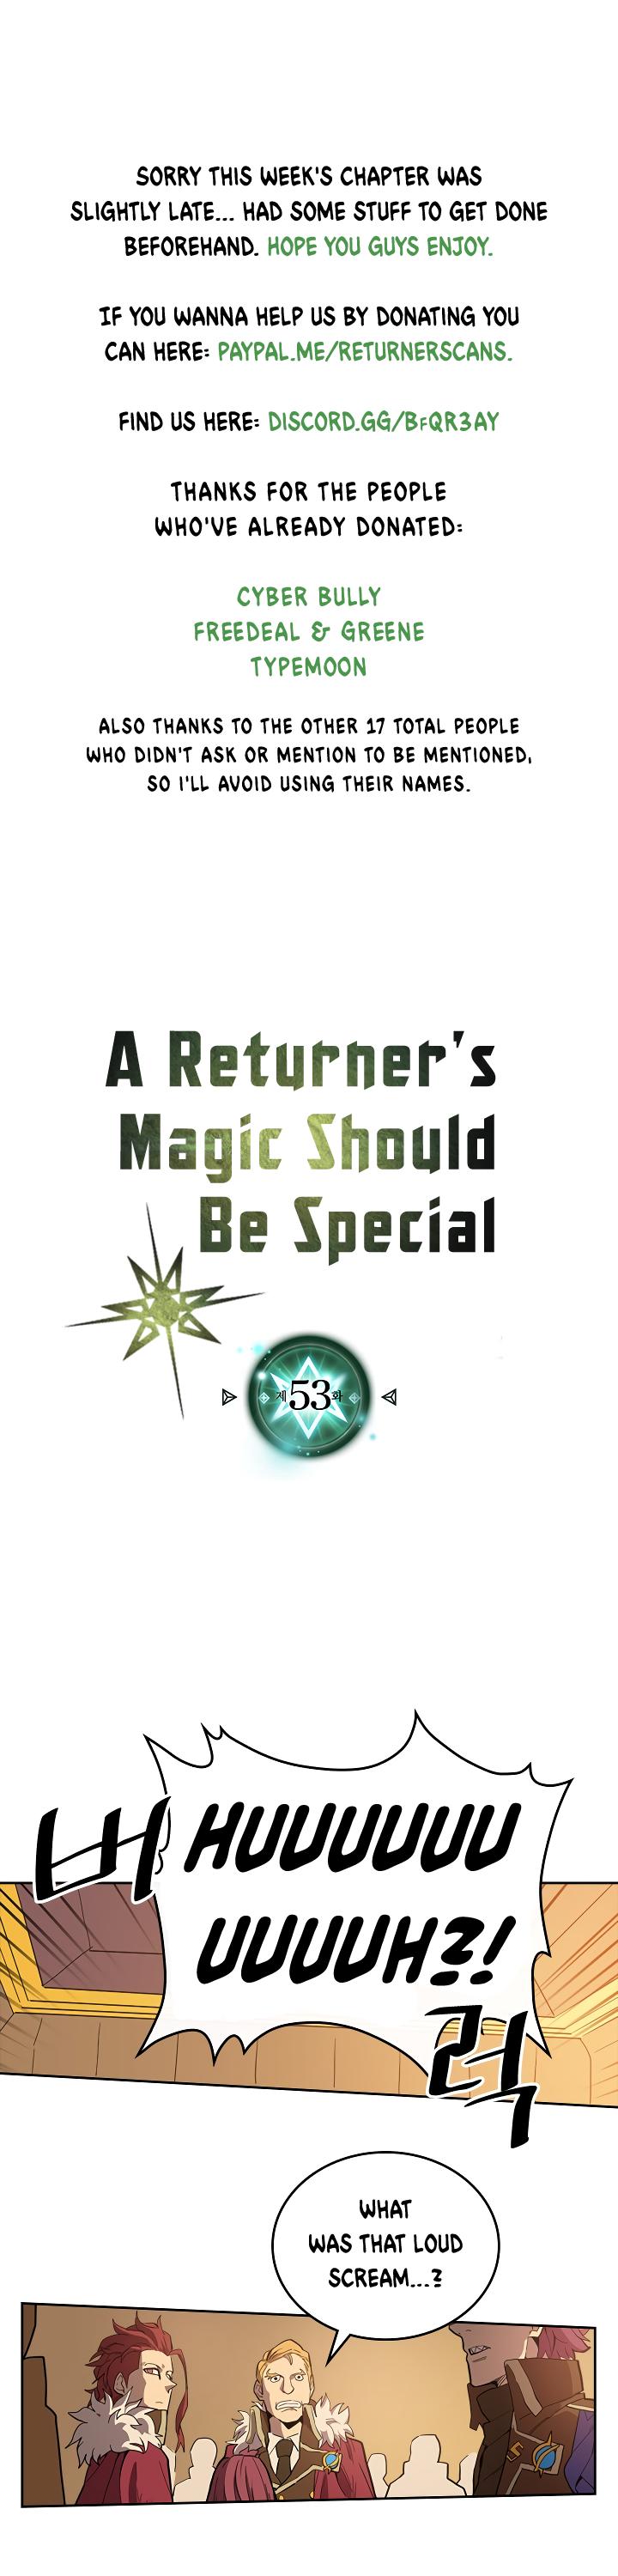 A Returner's Magic Should Be Special - Page 1